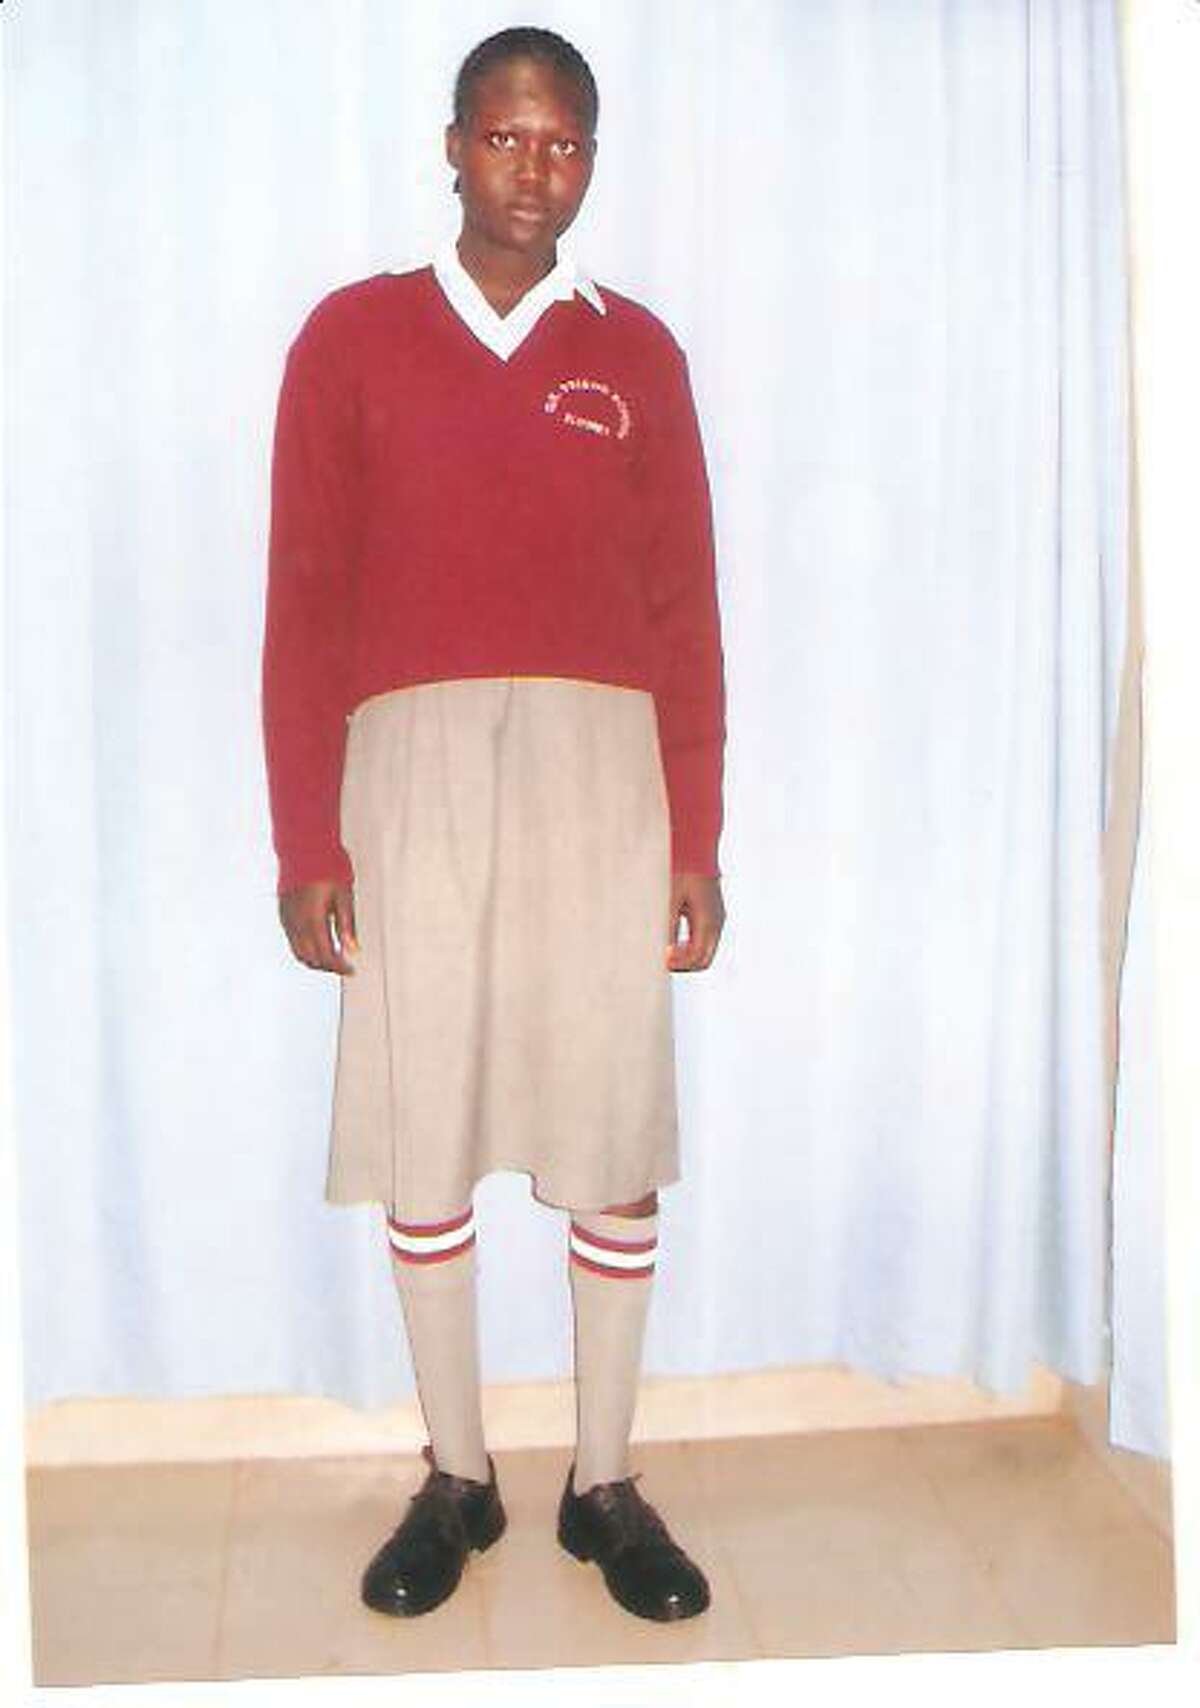 Contributed photo to the Register CitizenThe newest student and most recently sponsored orphan by New Sudan Jonglei Orphans Foundation, Akech Majok, is just one of many Sudanese refugee children the non-profit plans on helping.